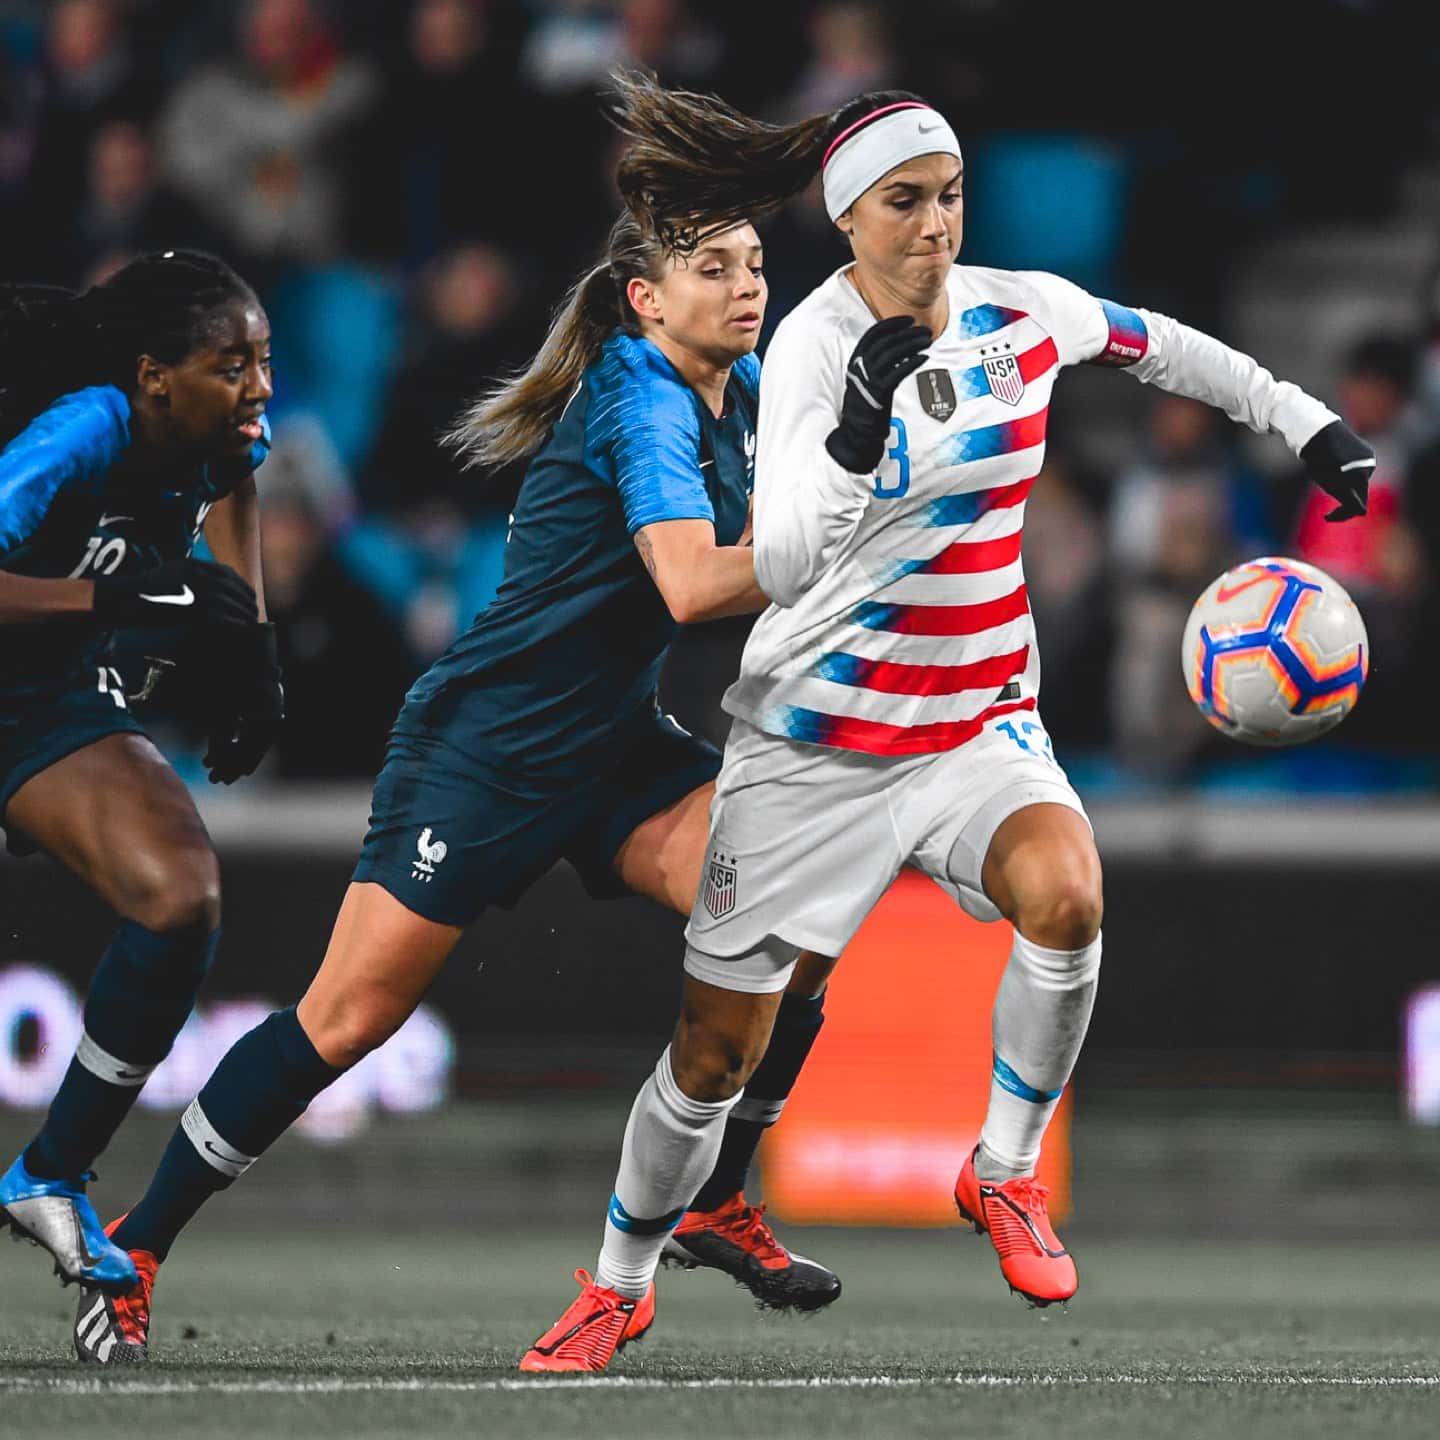 USA vs. France - Match History & Preview - Five Things to Know